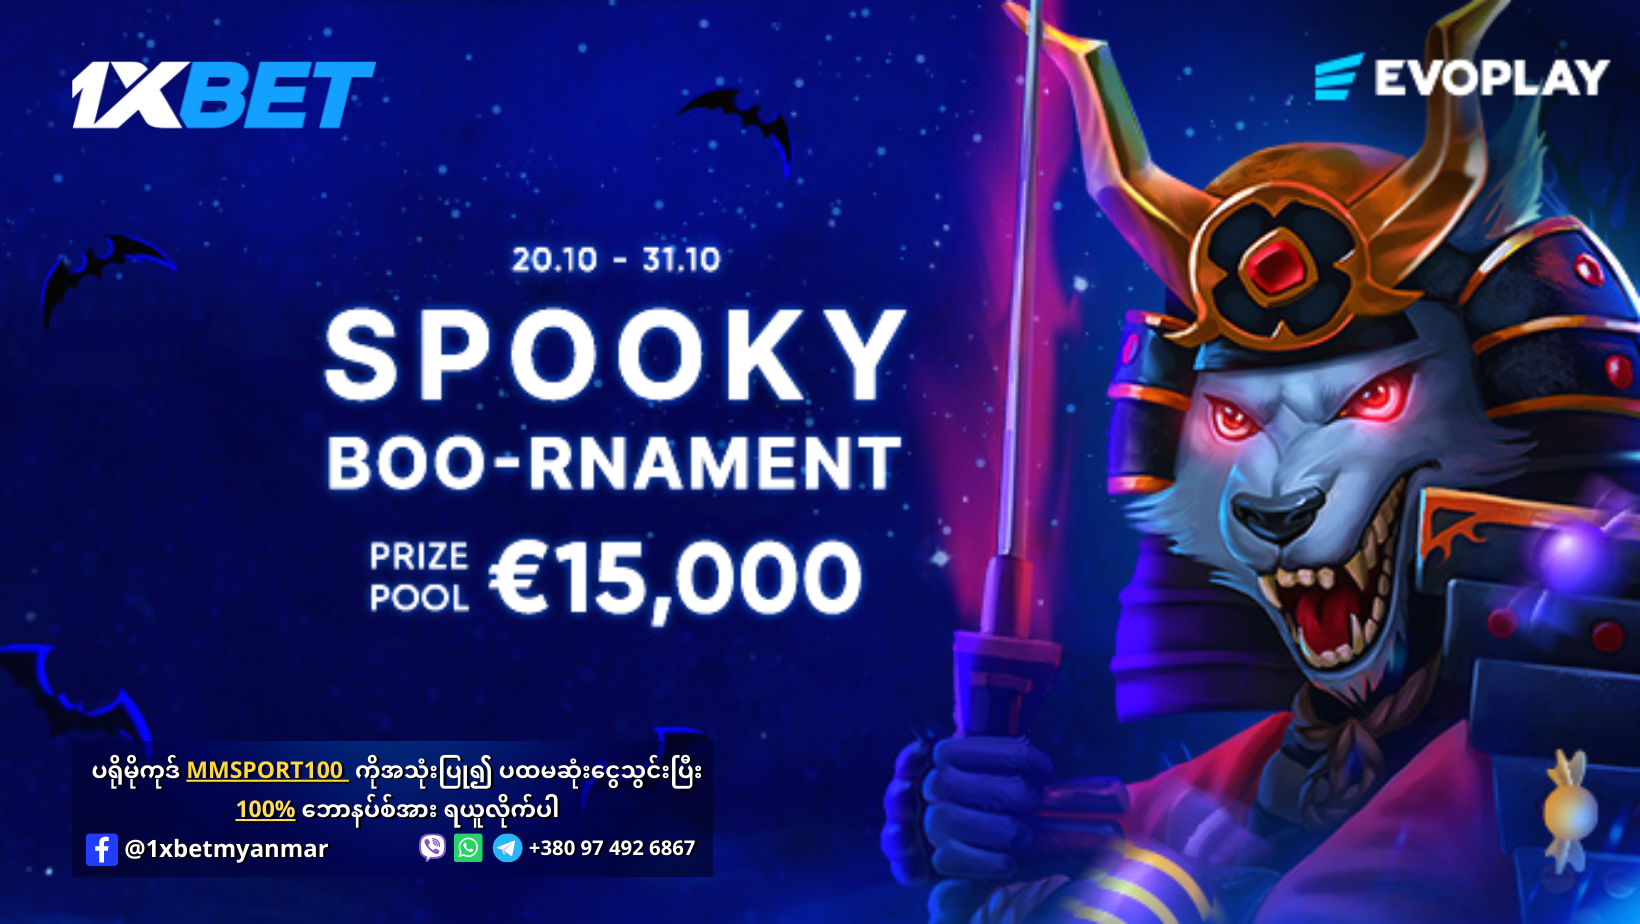 Spooky Boo-Rnament Offer